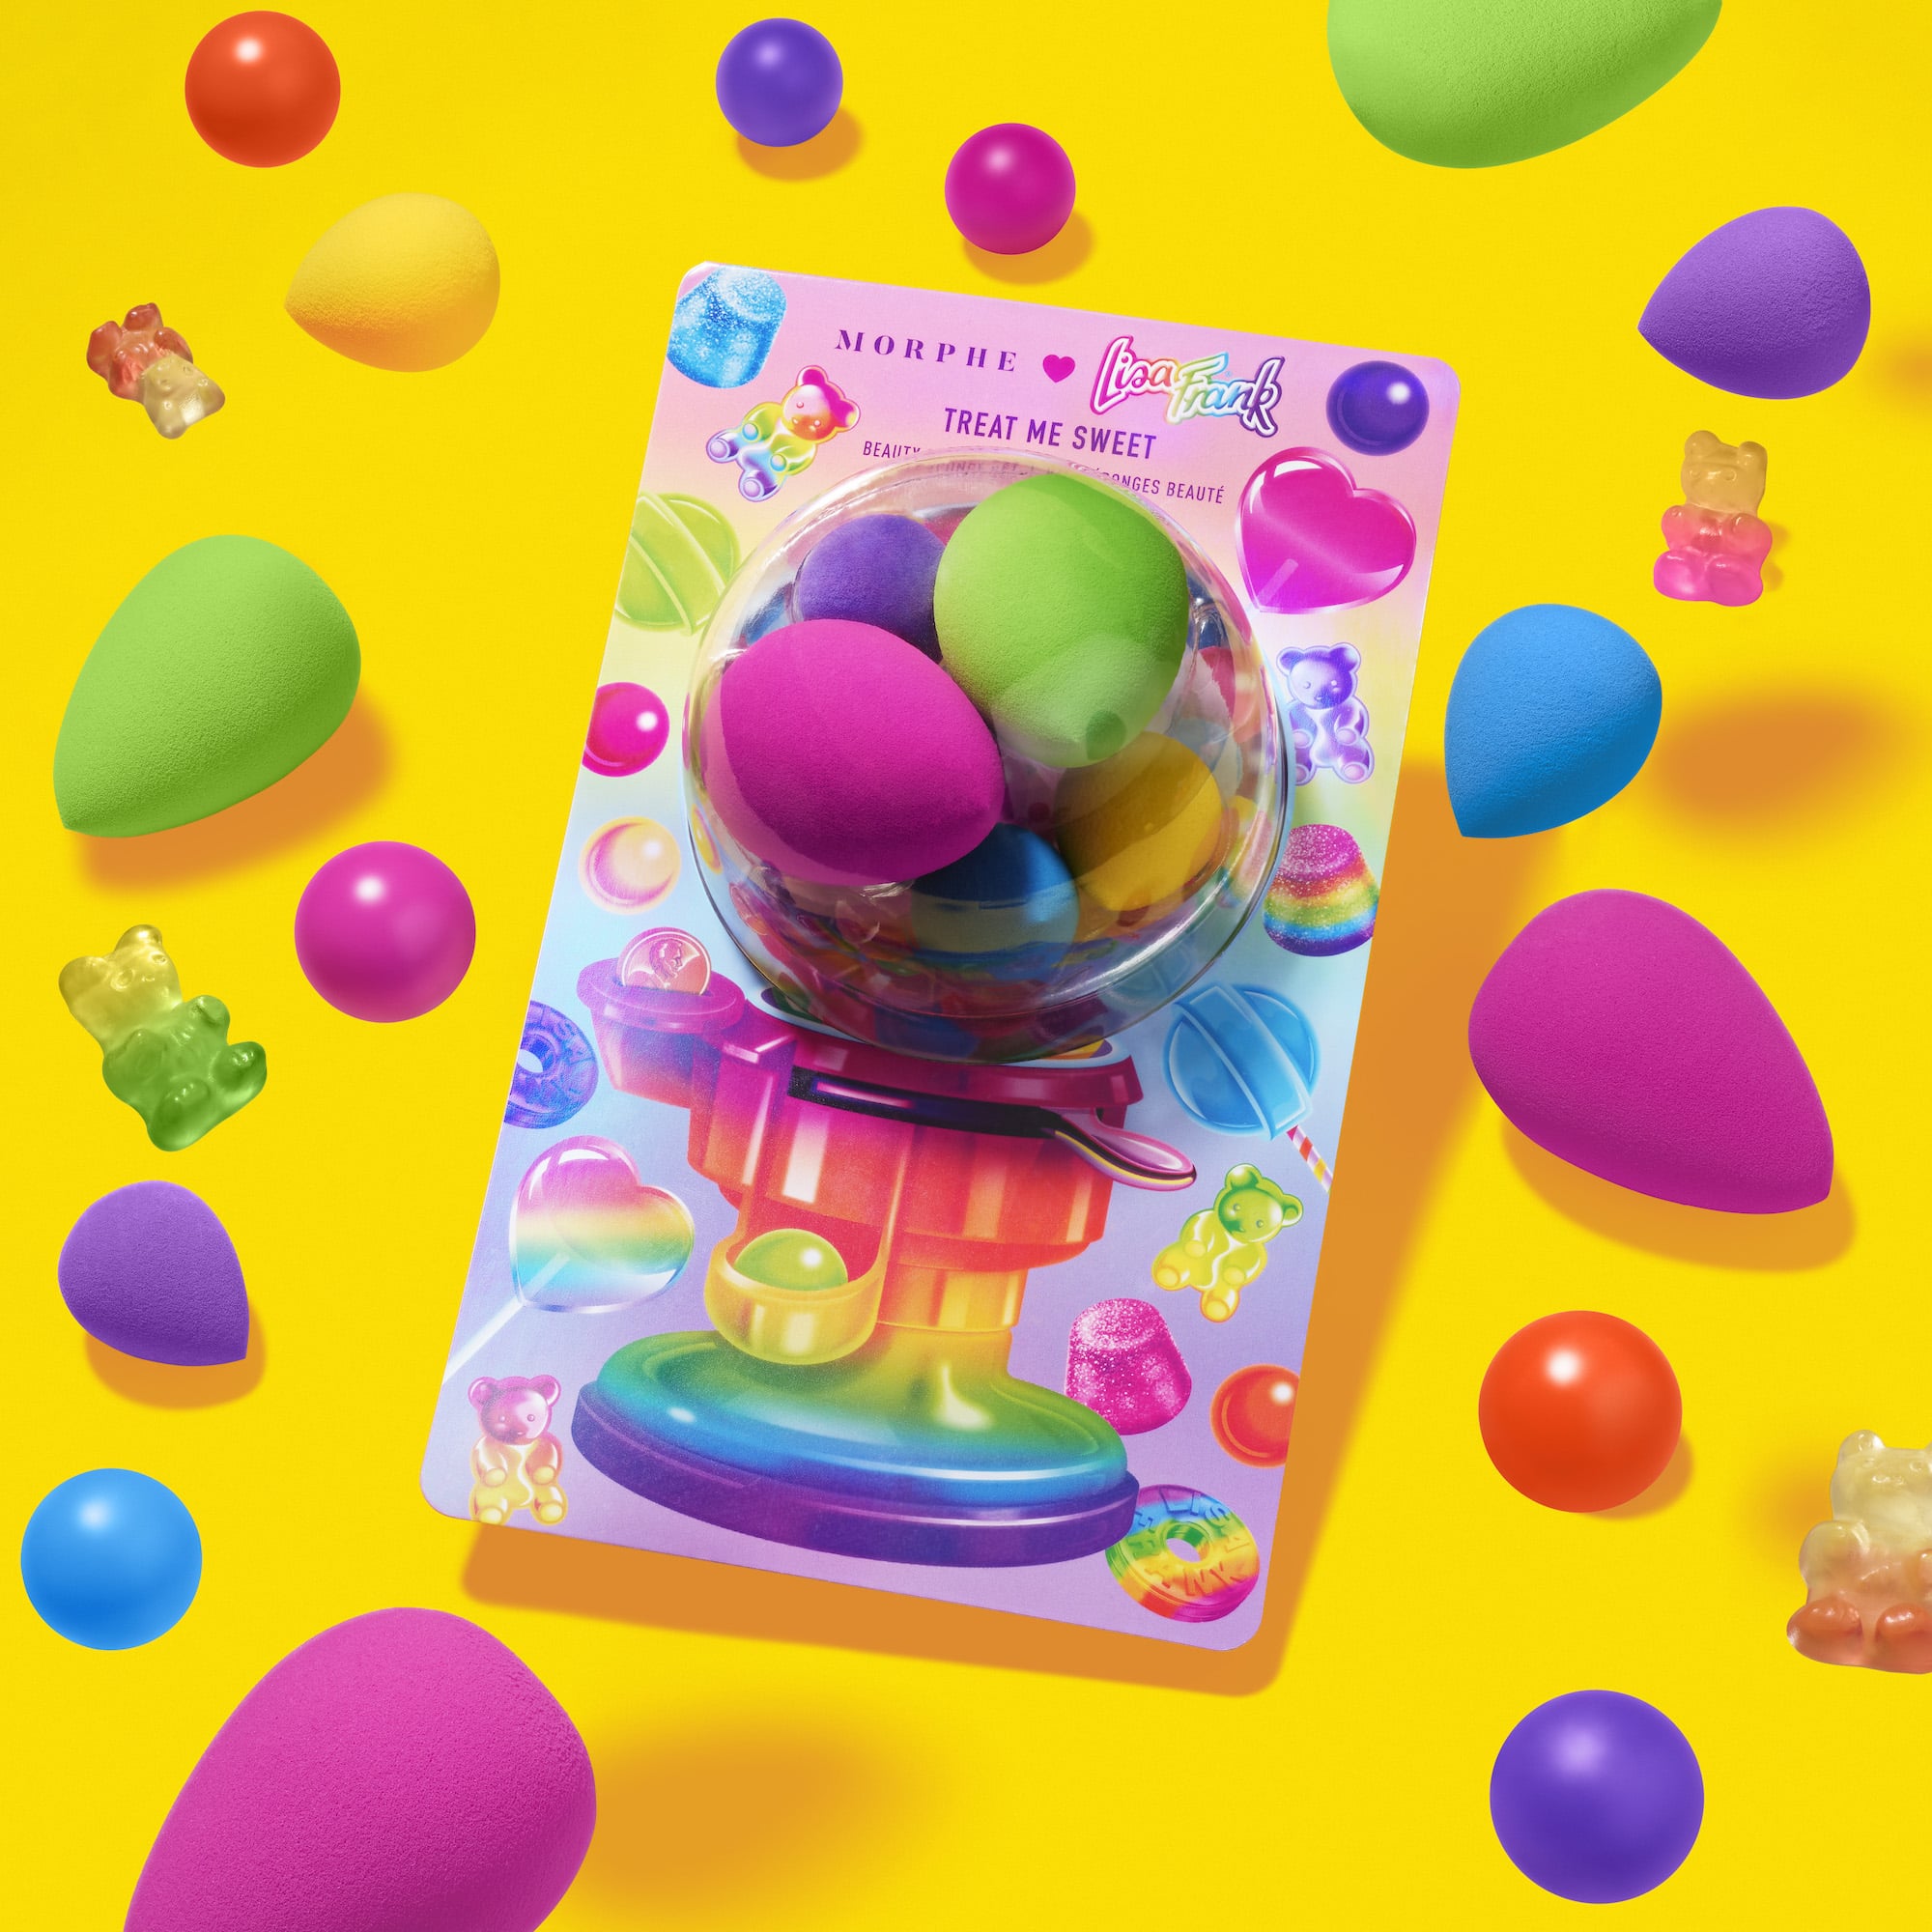 Lisa Frank is back! Here are our favorite items featuring the fun